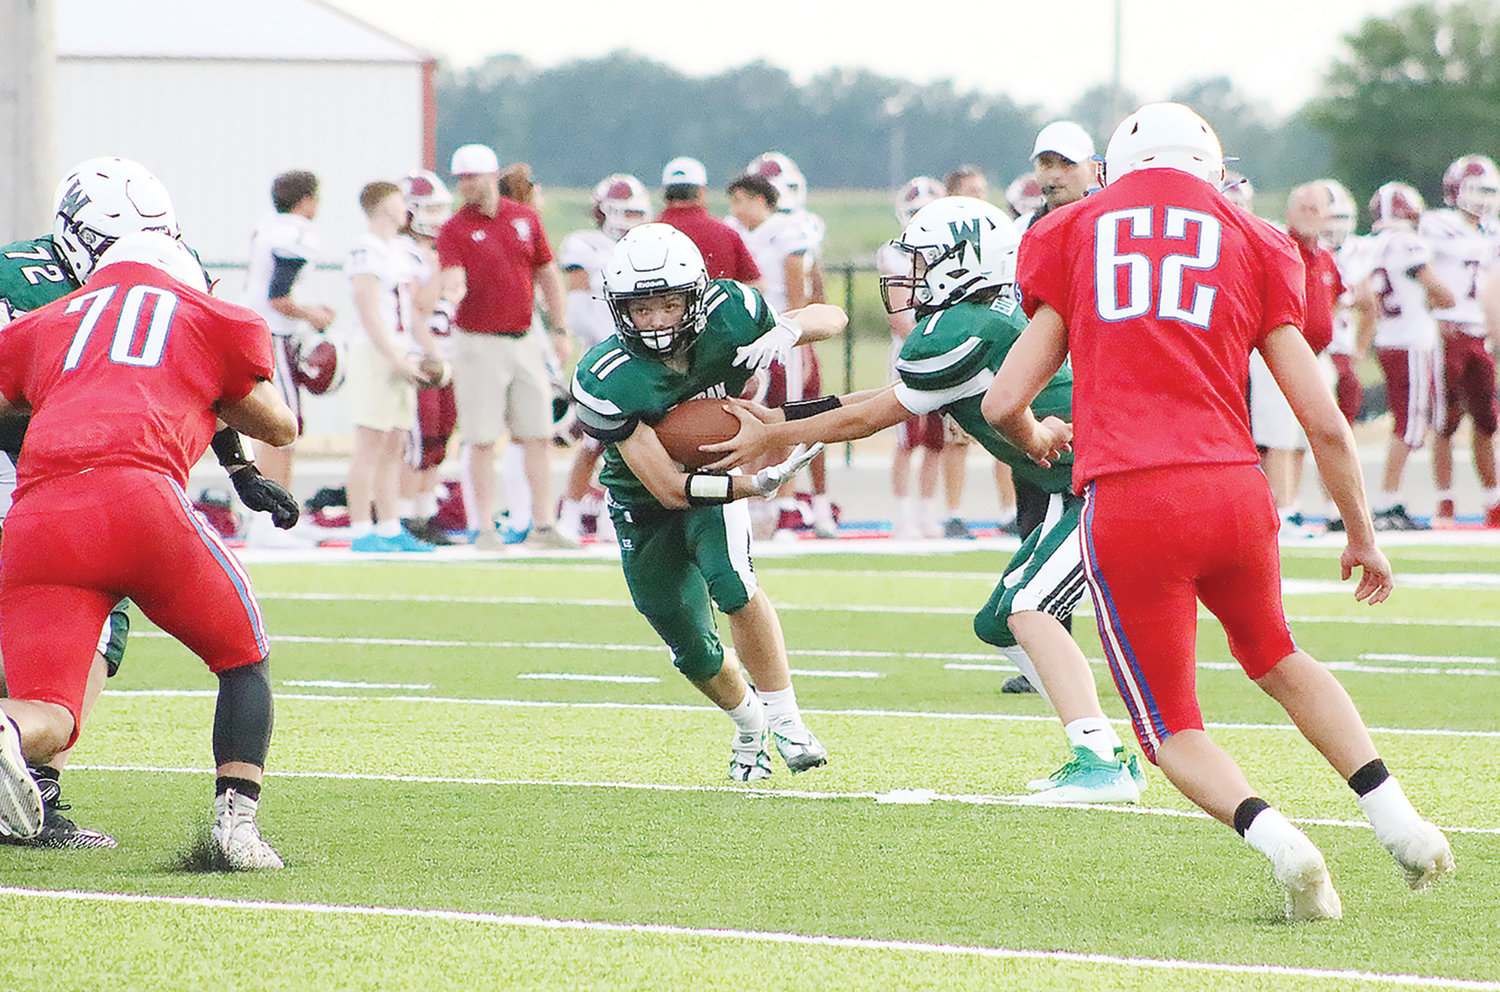 Westran's Jack Harlan looks for room to run against South Shelby during last Friday's jamboree at Shelbina.